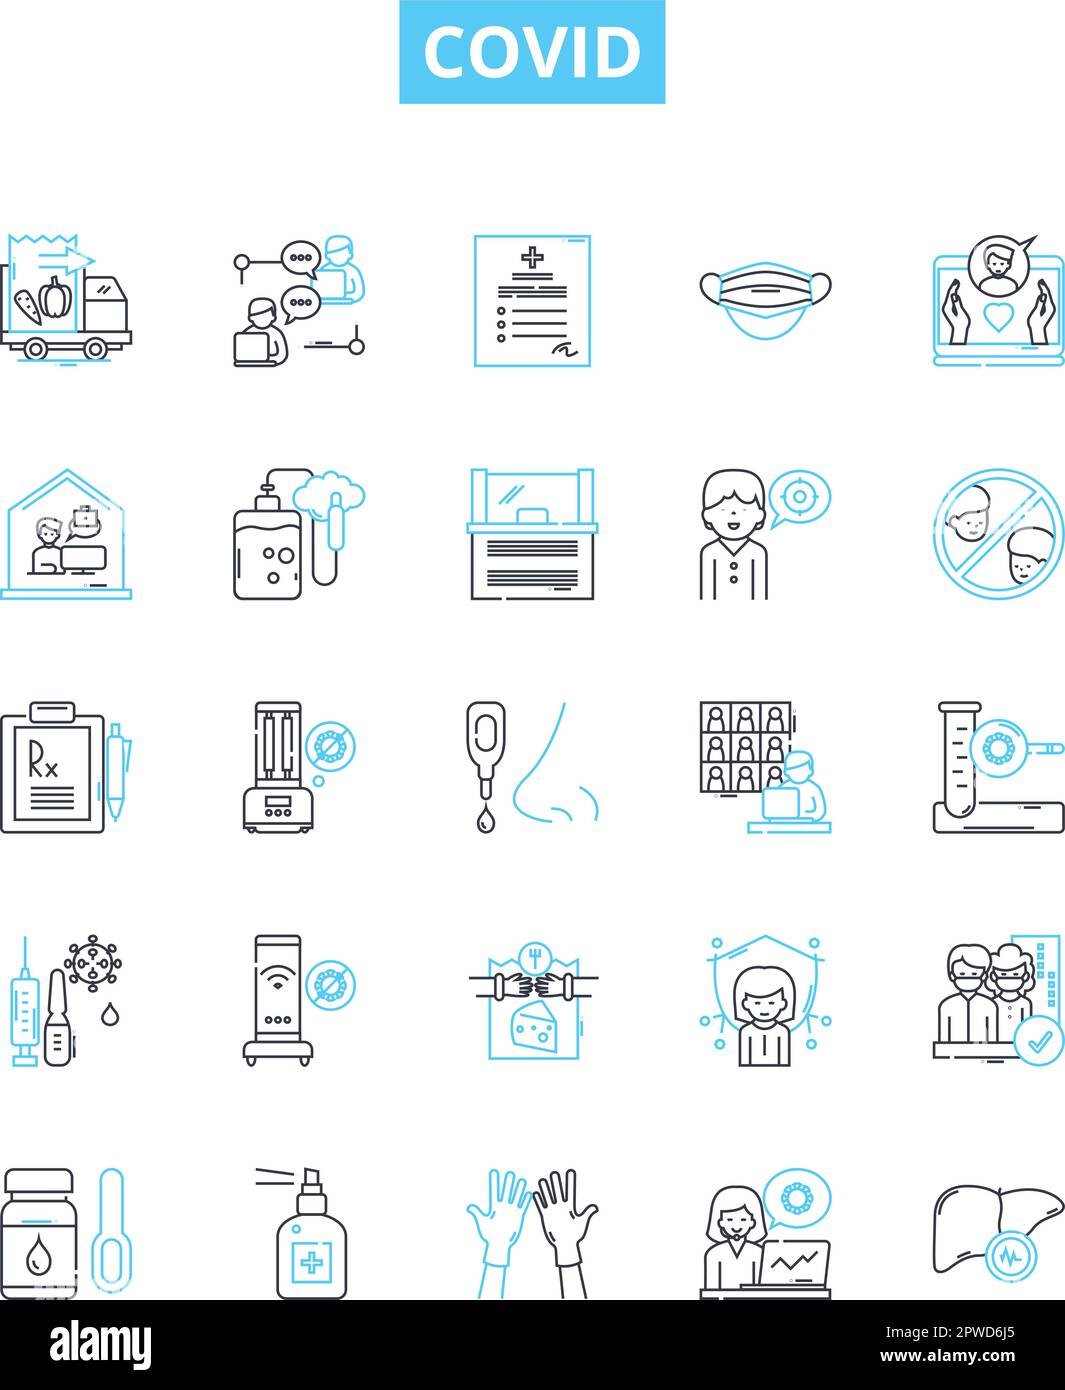 Covid vector line icons set. Covid, Pandemic, Virus, Coronavirus, Lockdown, Infection, Testing illustration outline concept symbols and signs Stock Vector